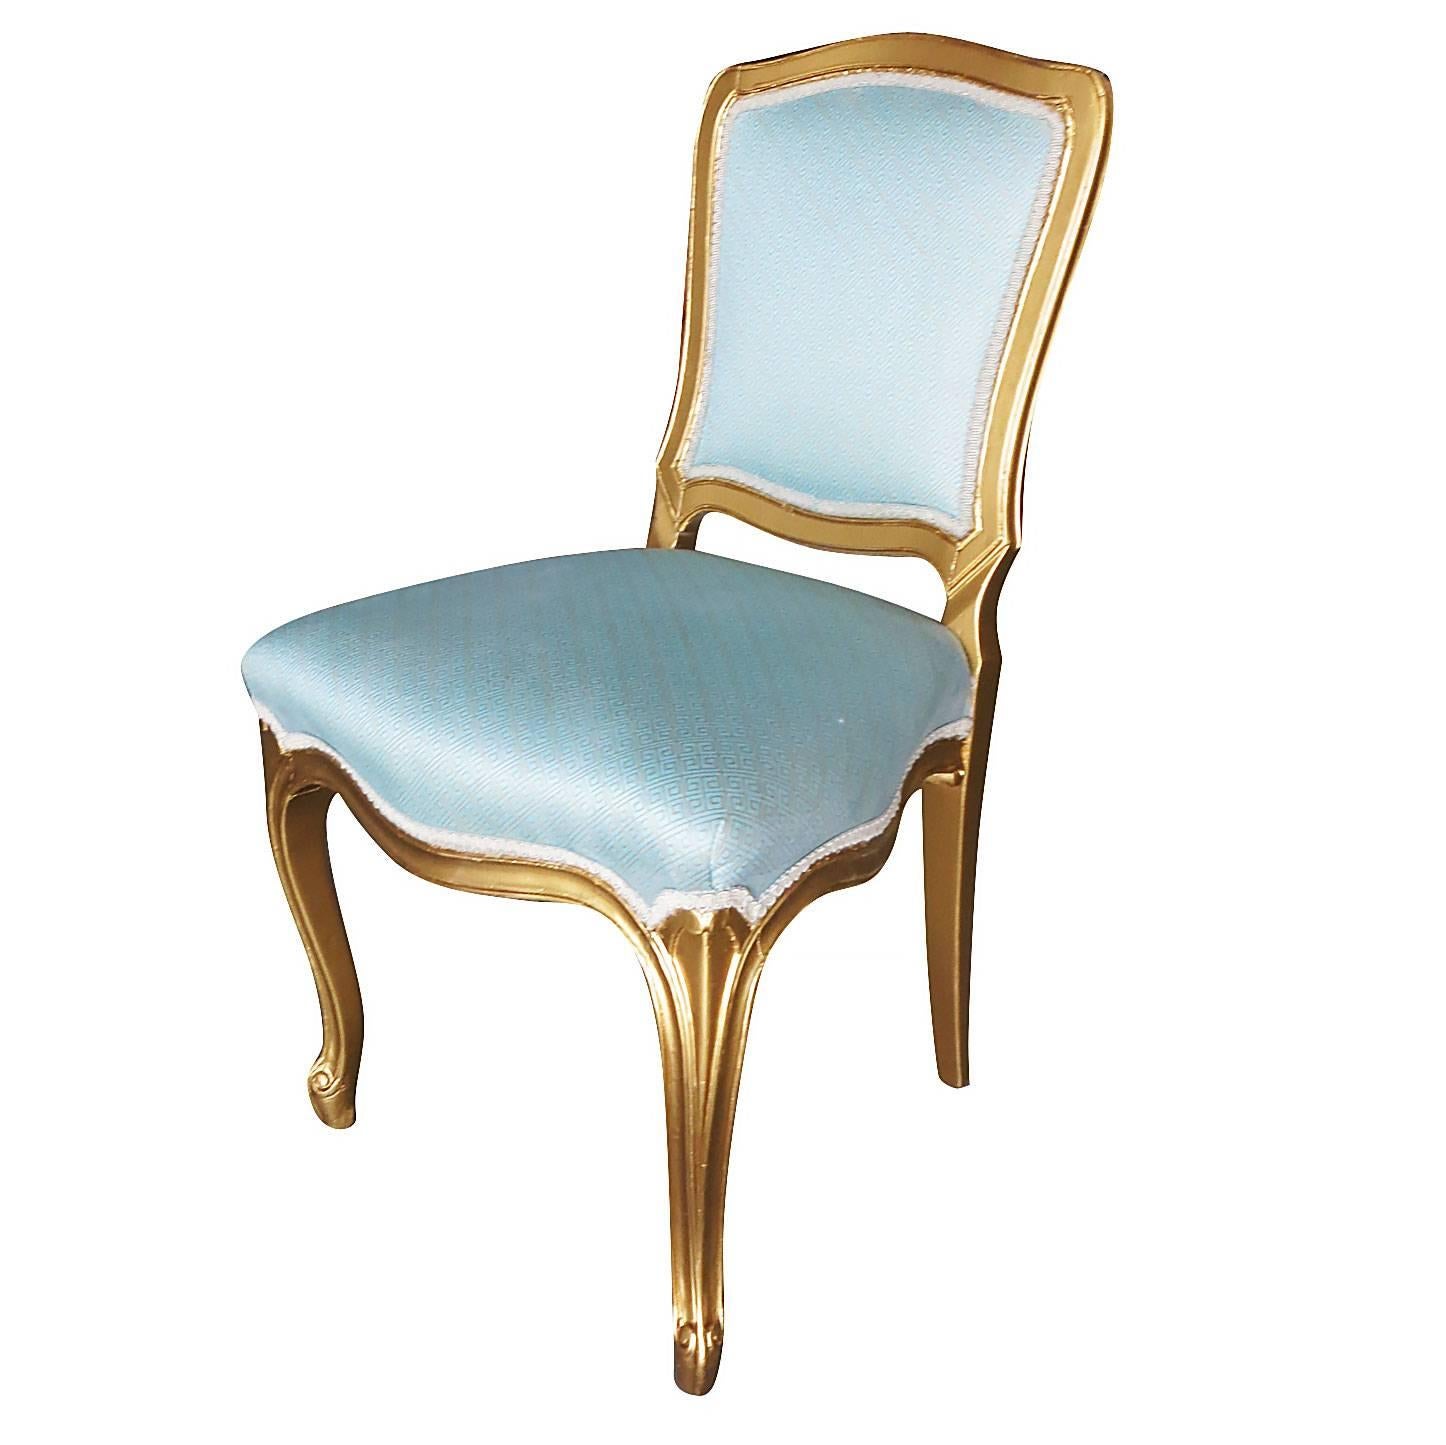 Set of 24 vintage circa 1950 dining room side chairs in a great Louis XVI Hollywood Regency style finished in a gold leaf color with featuring blue and gold colored fabric covers.

A different quantity of chairs is available upon request.  